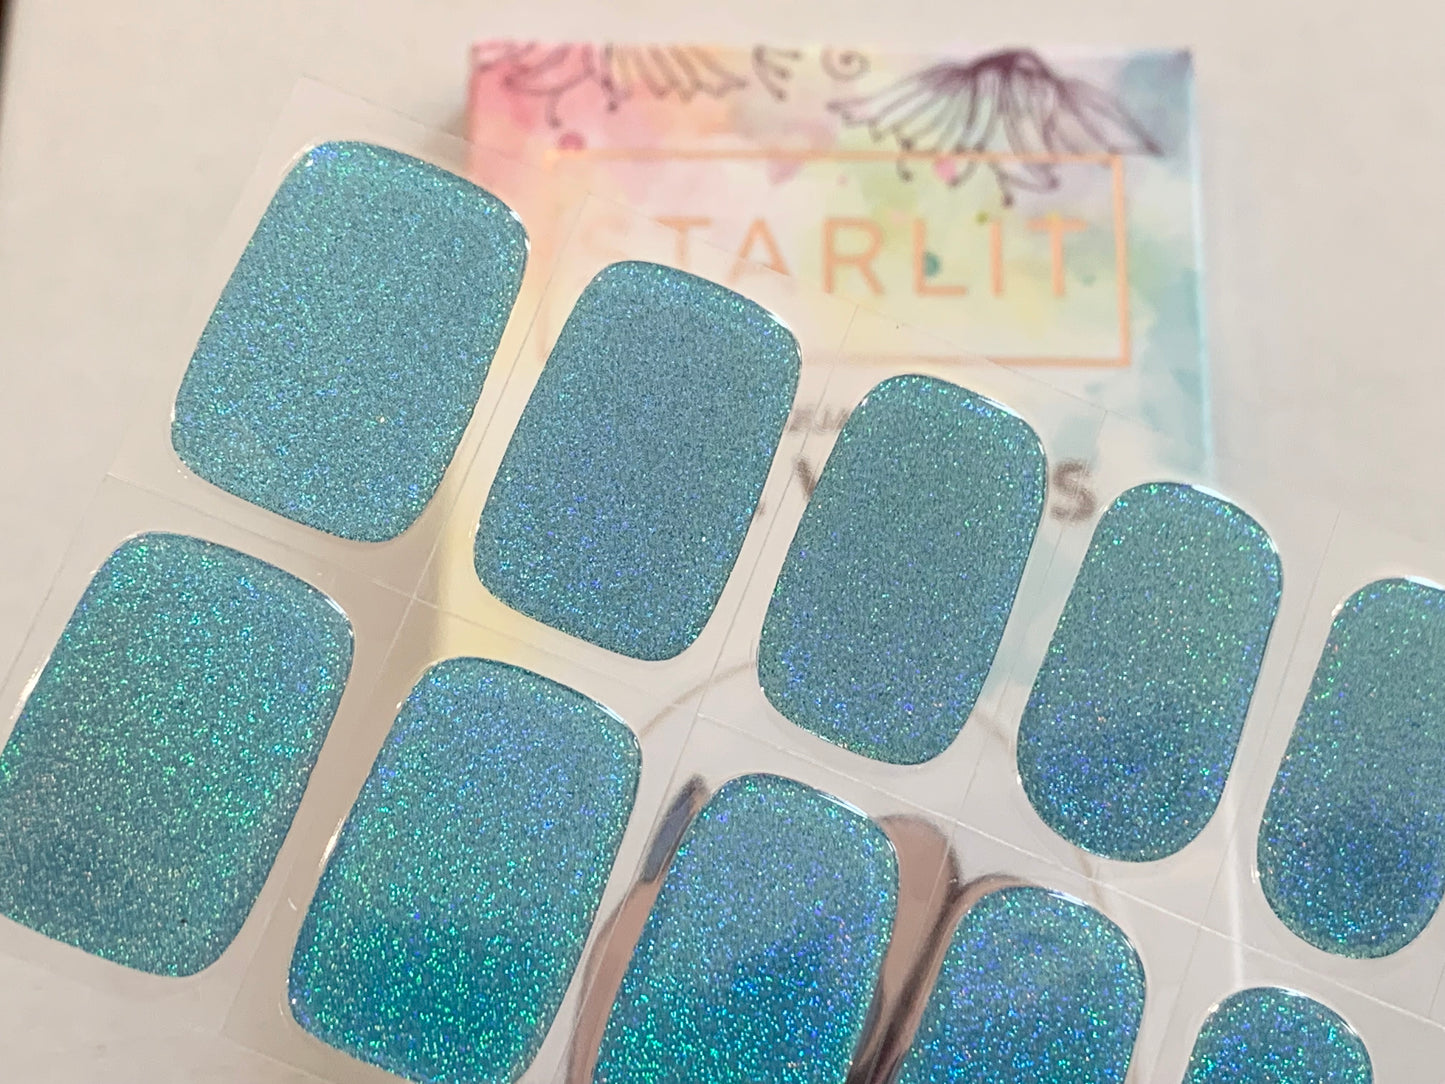 Dazzling Teal Holographic Semi-Cured Gel Nail Wrap